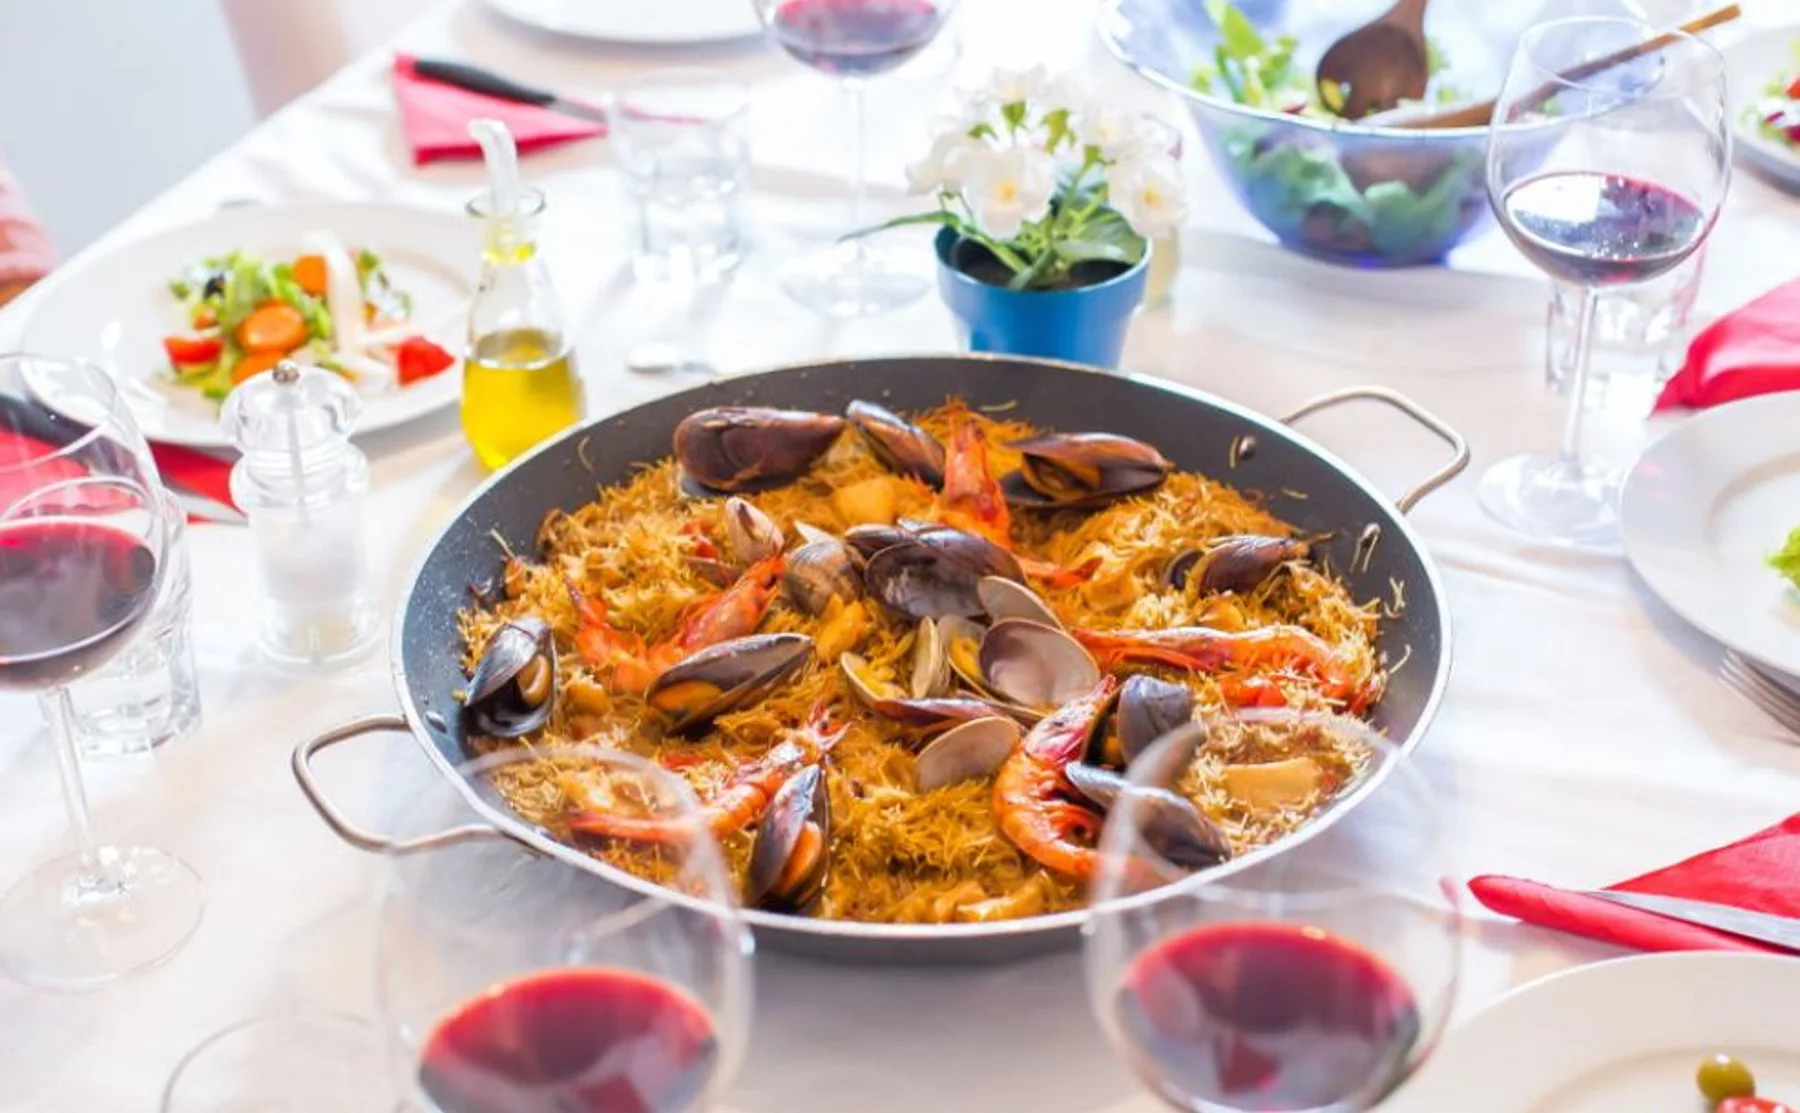 Be delighted with Homemade Paella in Barcelona  - 986927